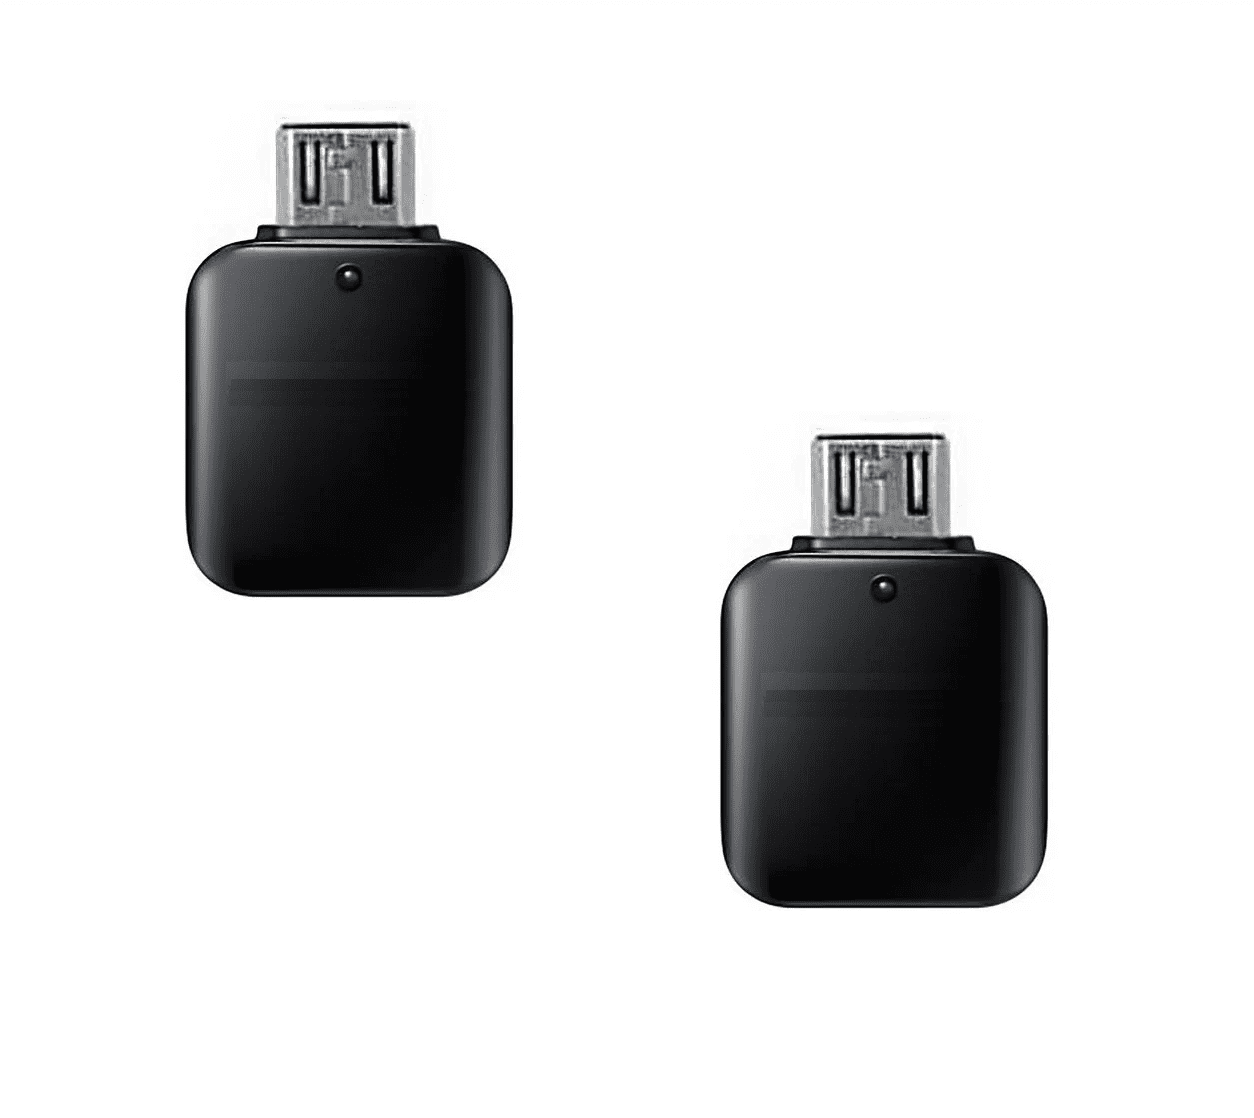 PRO OTG Power Cable Works for Alcatel Idol 4s with Android with Power Connect to Any Compatible USB Accessory with MicroUSB